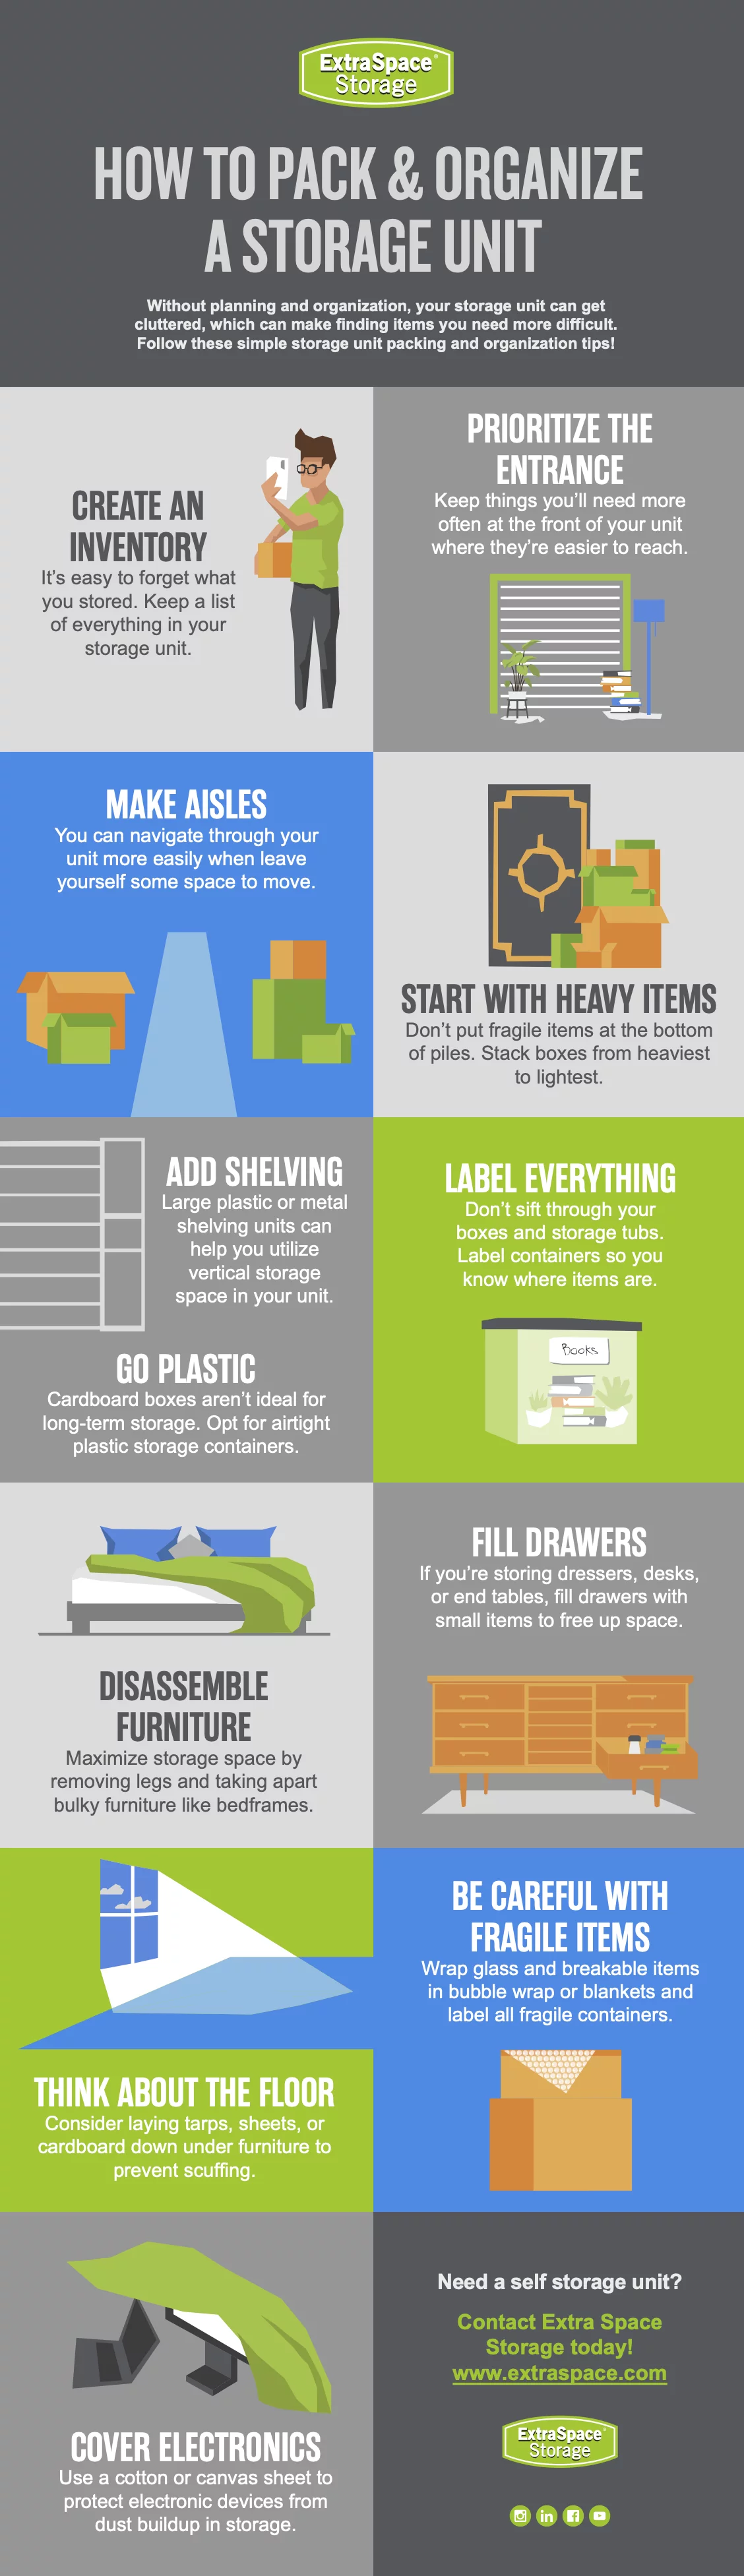 https://www.extraspace.com/blog/wp-content/uploads/2018/11/How-to-Pack-Organize-Storage-Unit-Infographic.png.webp